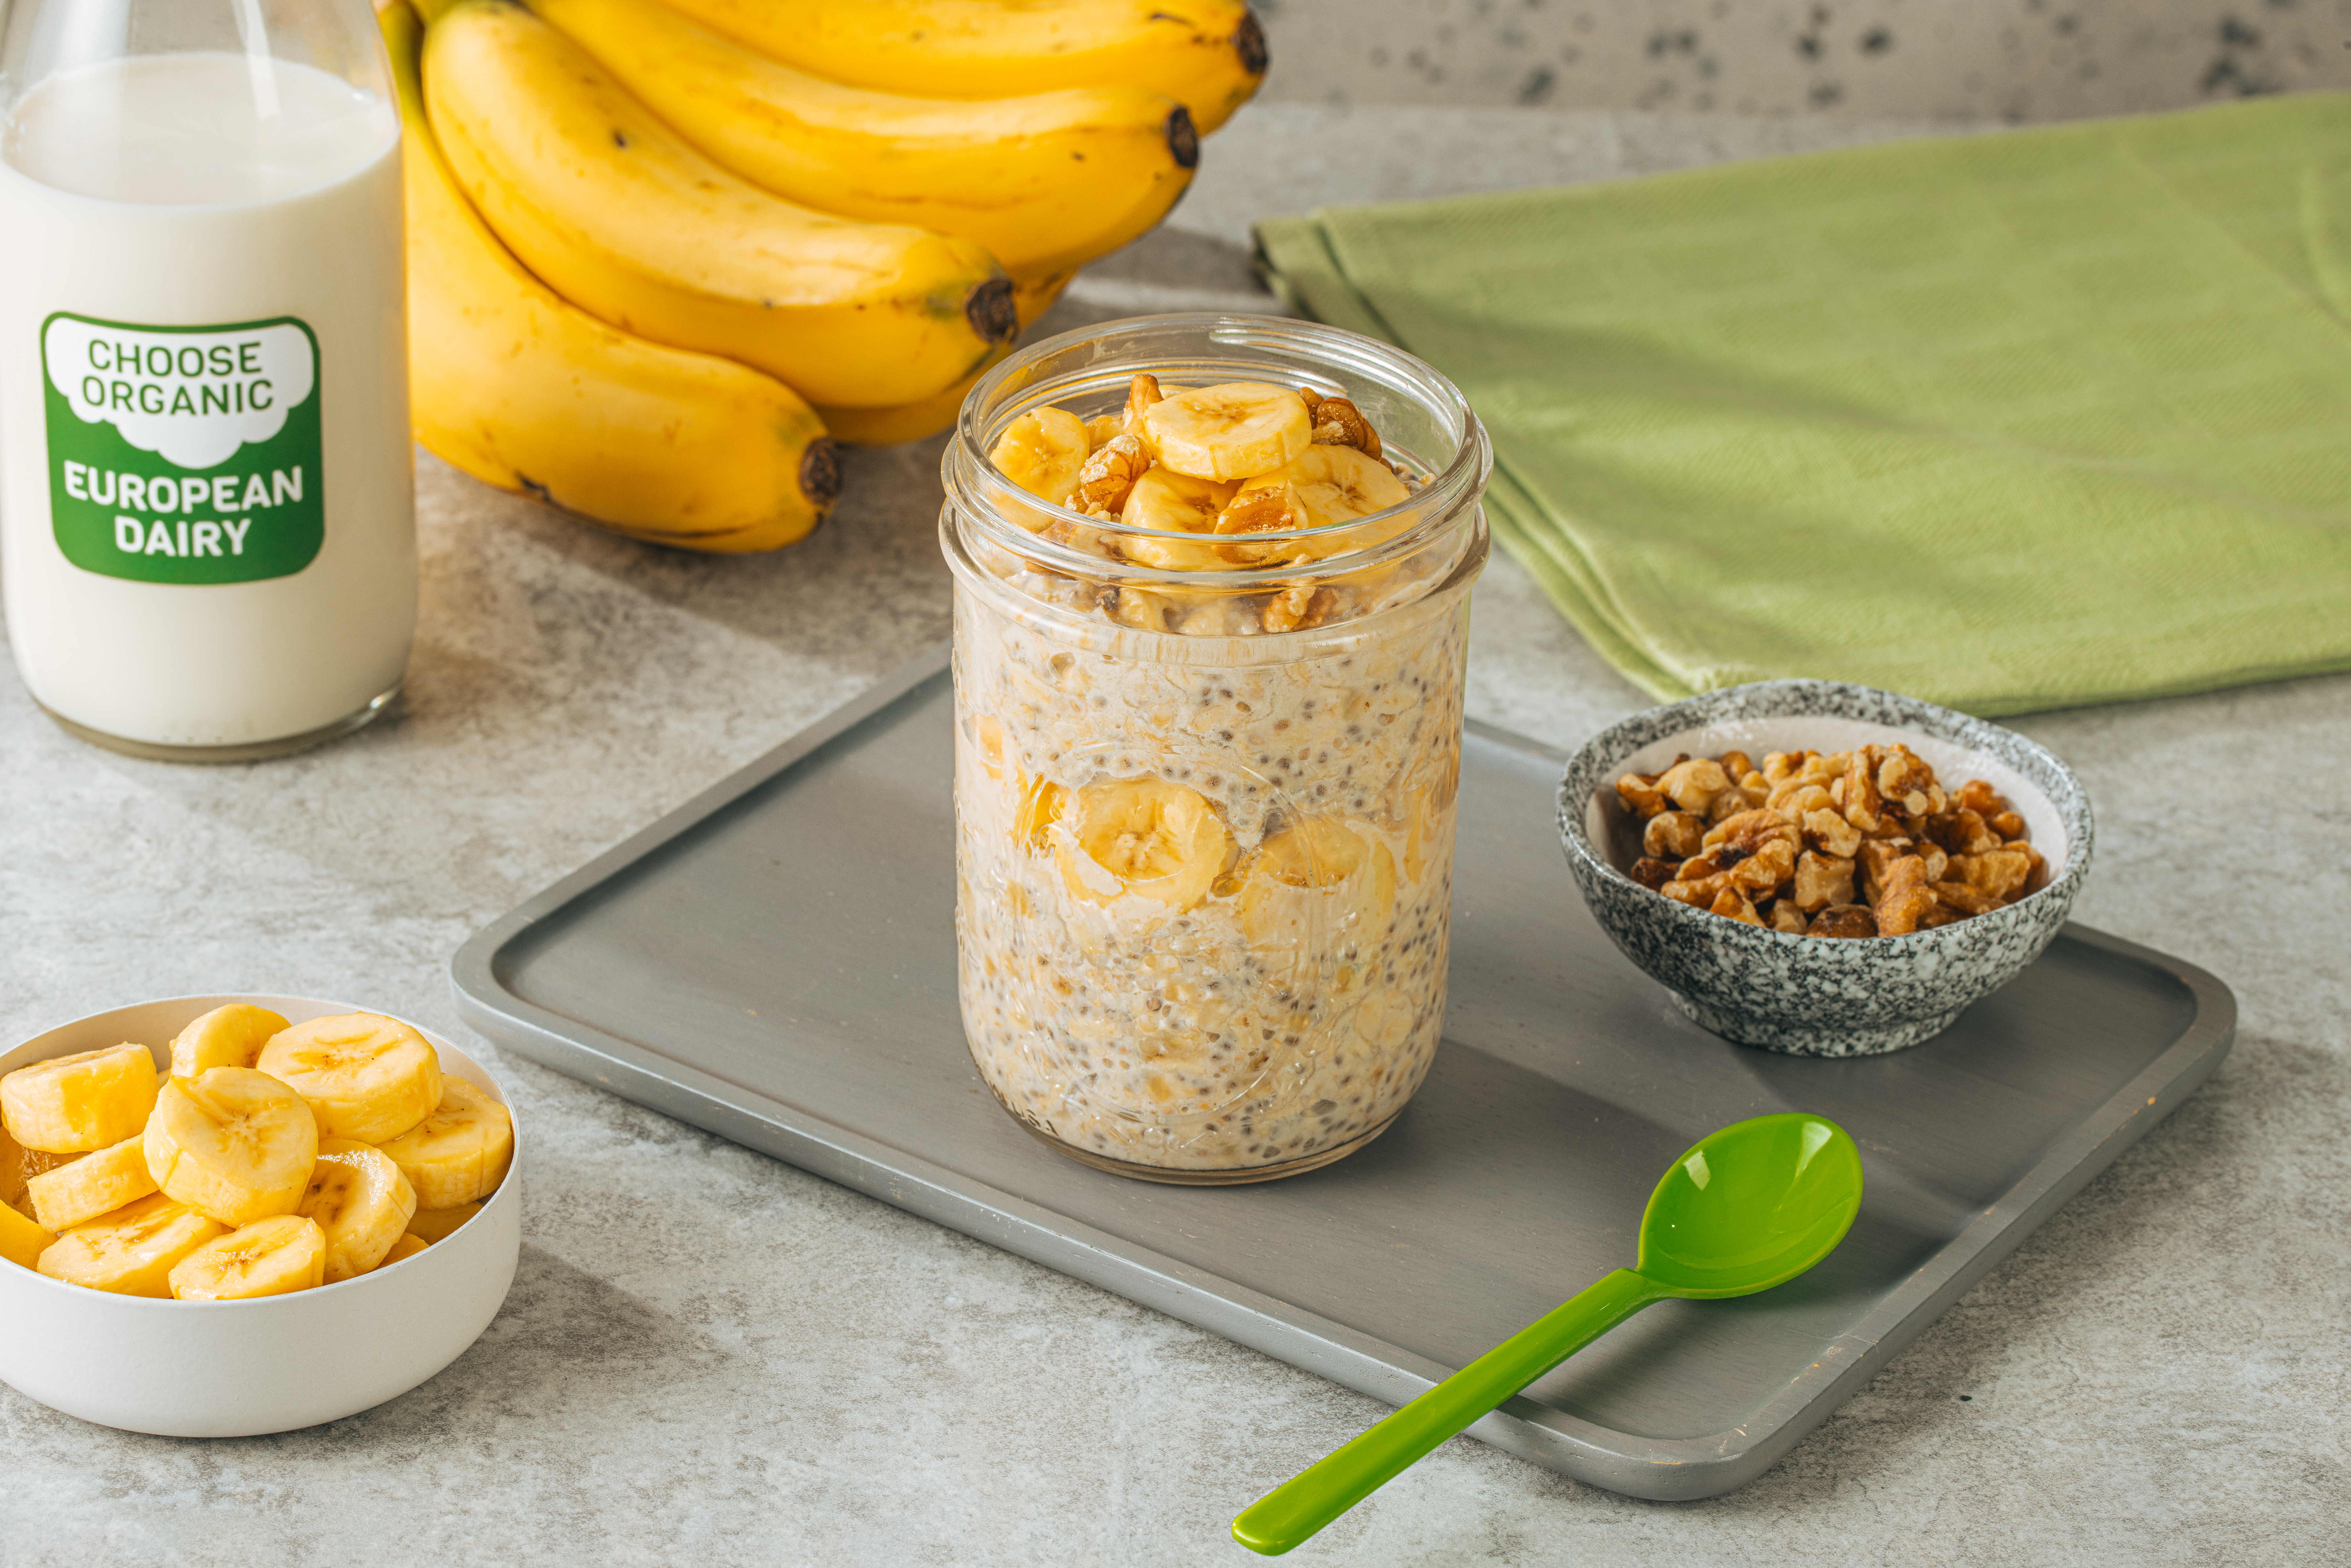 Take your run-off-the-mill overnight oats to the next level with organic European dairy for an energizing and fulfilling breakfast